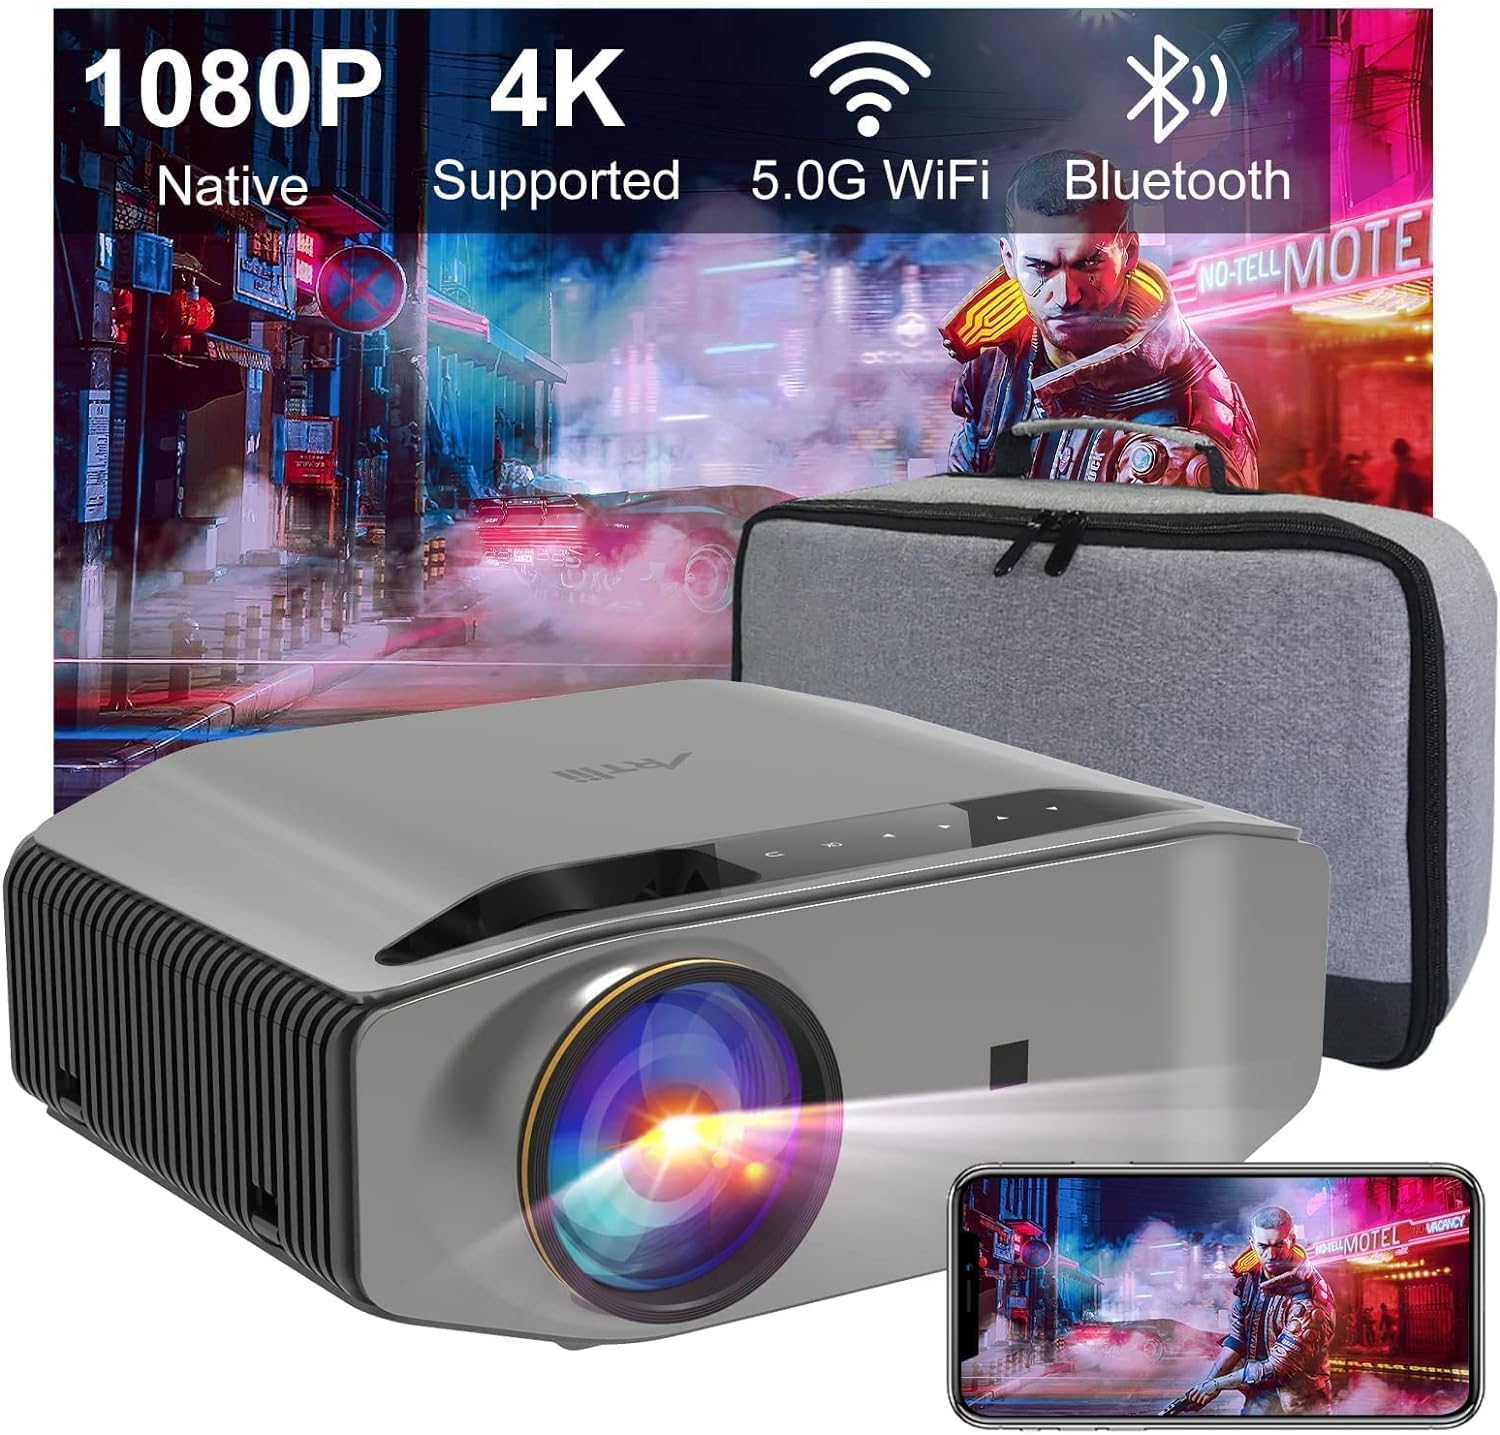 Buy 5G WiFi Bluetooth Projector, Artlii Energon 2 Full HD Native 1080P Outdoor Projector 4K Supported with Artlii 120 inch 4K HD 16:9 Wrinkle-Free Outdoor Portable Projector Screen with Stand Online in